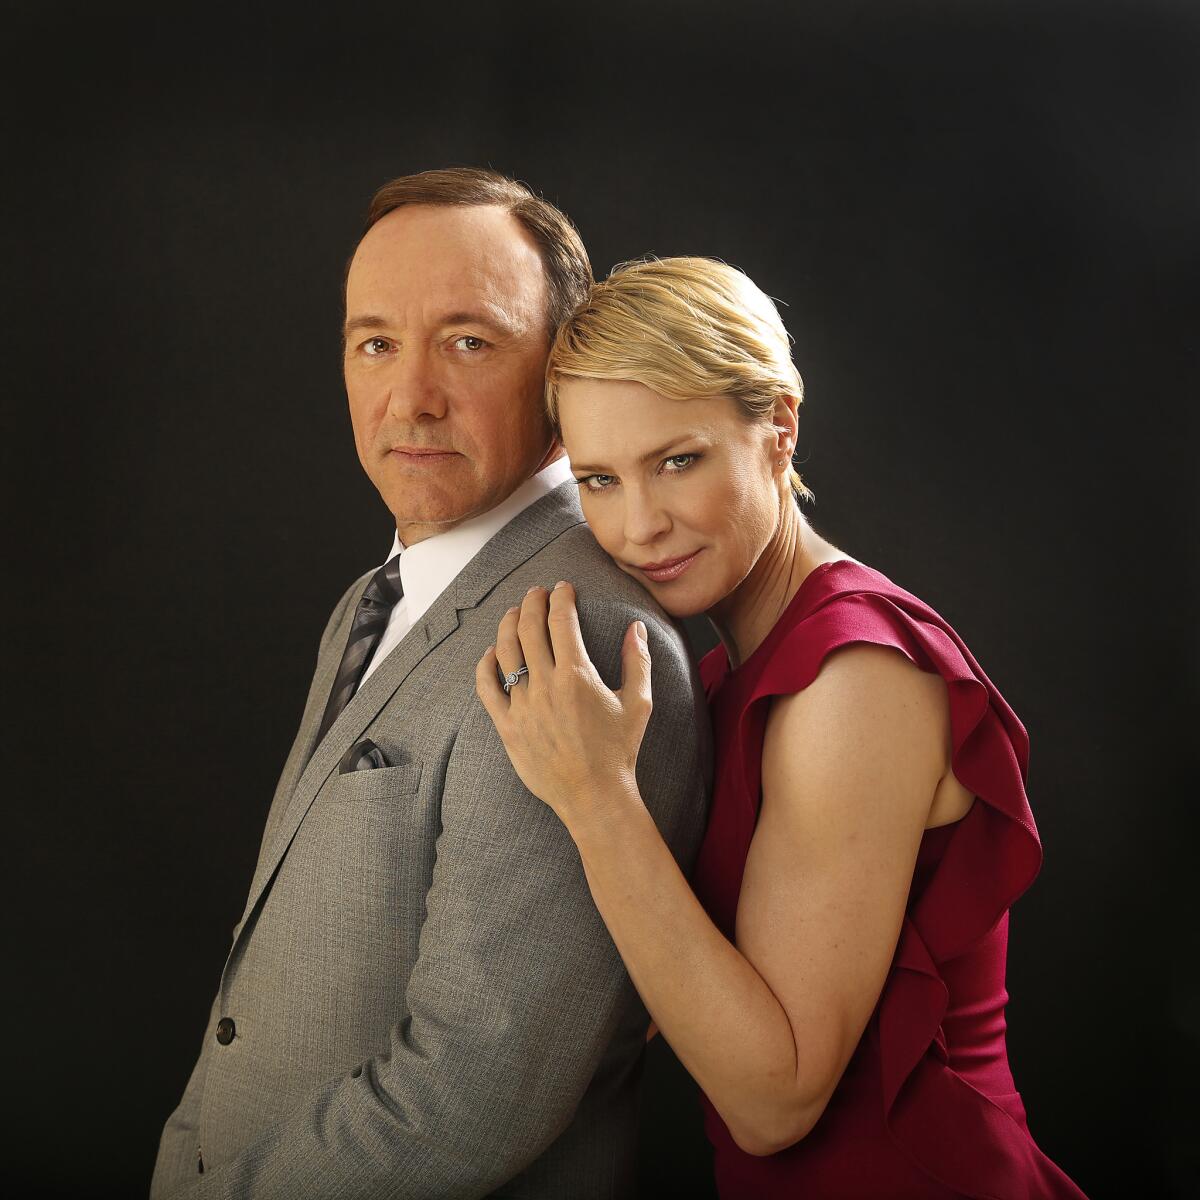 The second season of the critically acclaimed series, "House of Cards," returns to Netflix on Valentine's day, with actors Kevin Spacey and Robin Wright reprising their roles as an ambitious Washington D. C. power-couple.